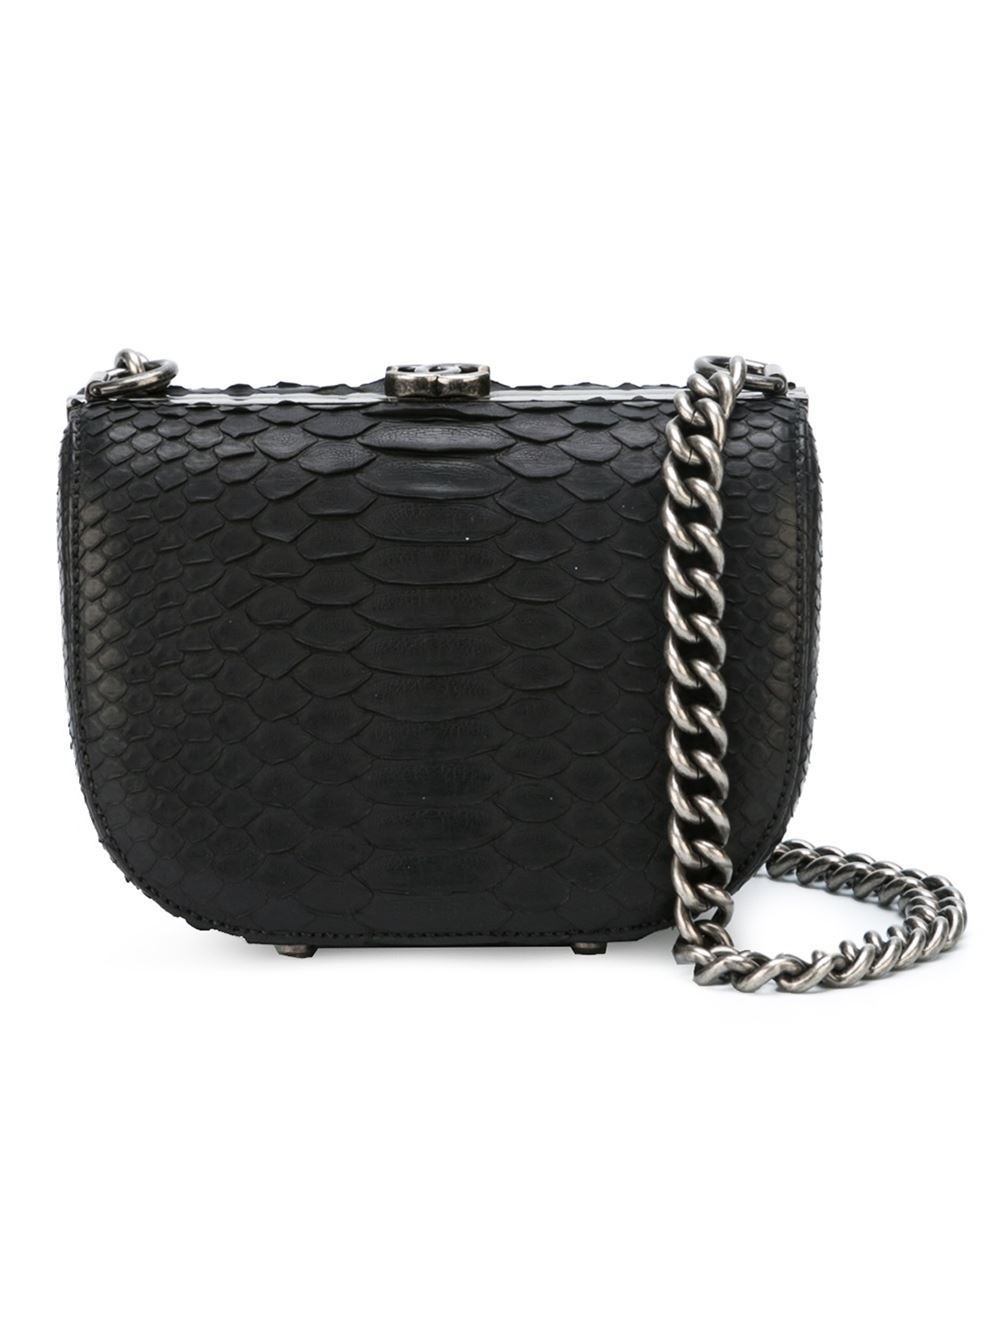 This black python skin small box shoulder bag from Chanel featuresa silver-tone logo plaque, a top clasp fastening, a chain and leather strap, an internal slip pocket and an internal logo plaque.

Colour: Black

Material: Python

Measurements: